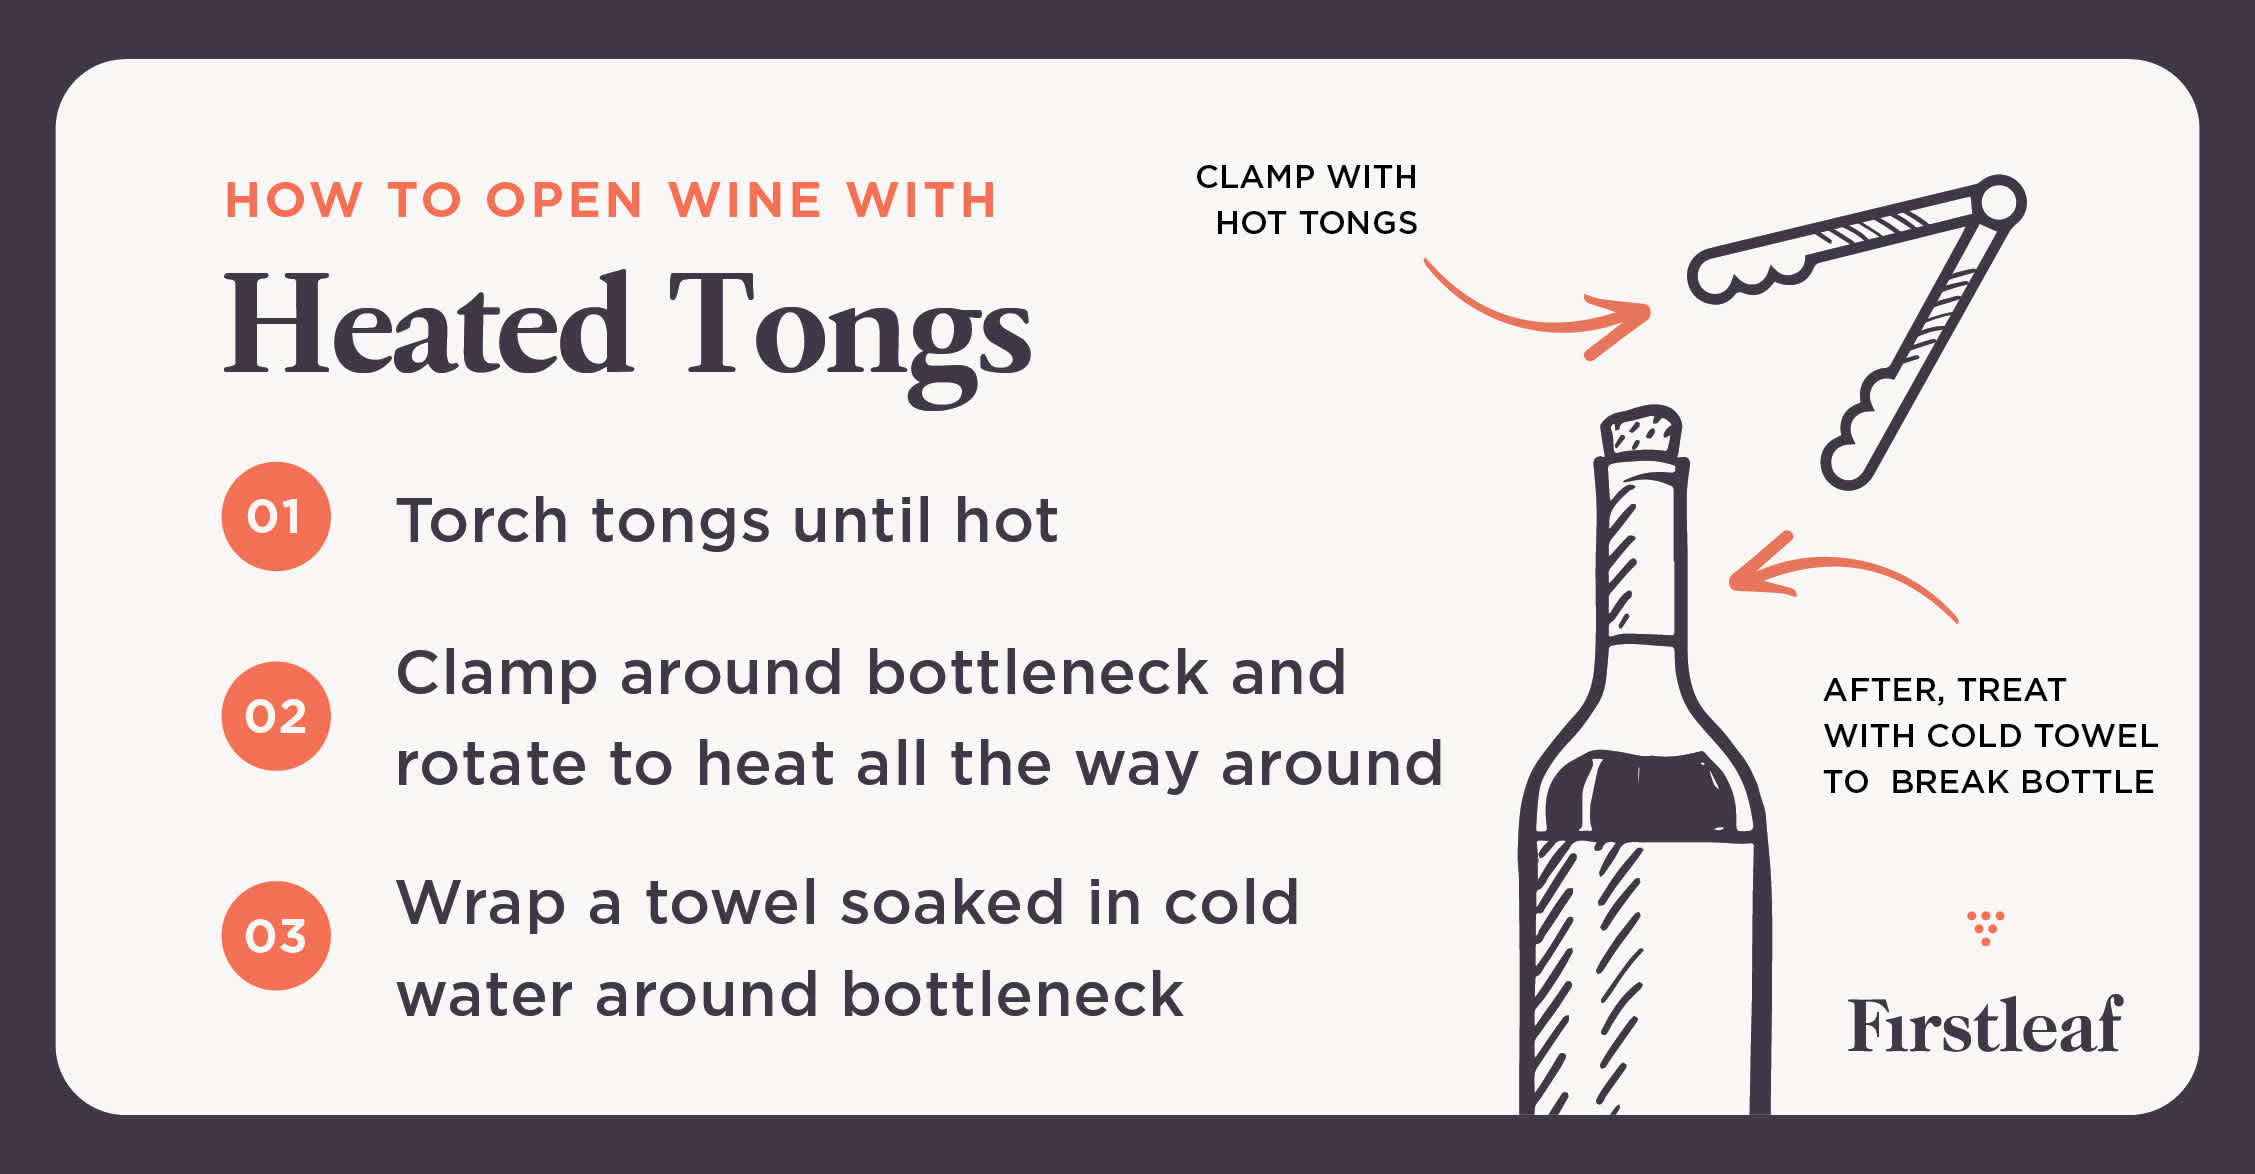 How to Open Wine with Heated Tongs